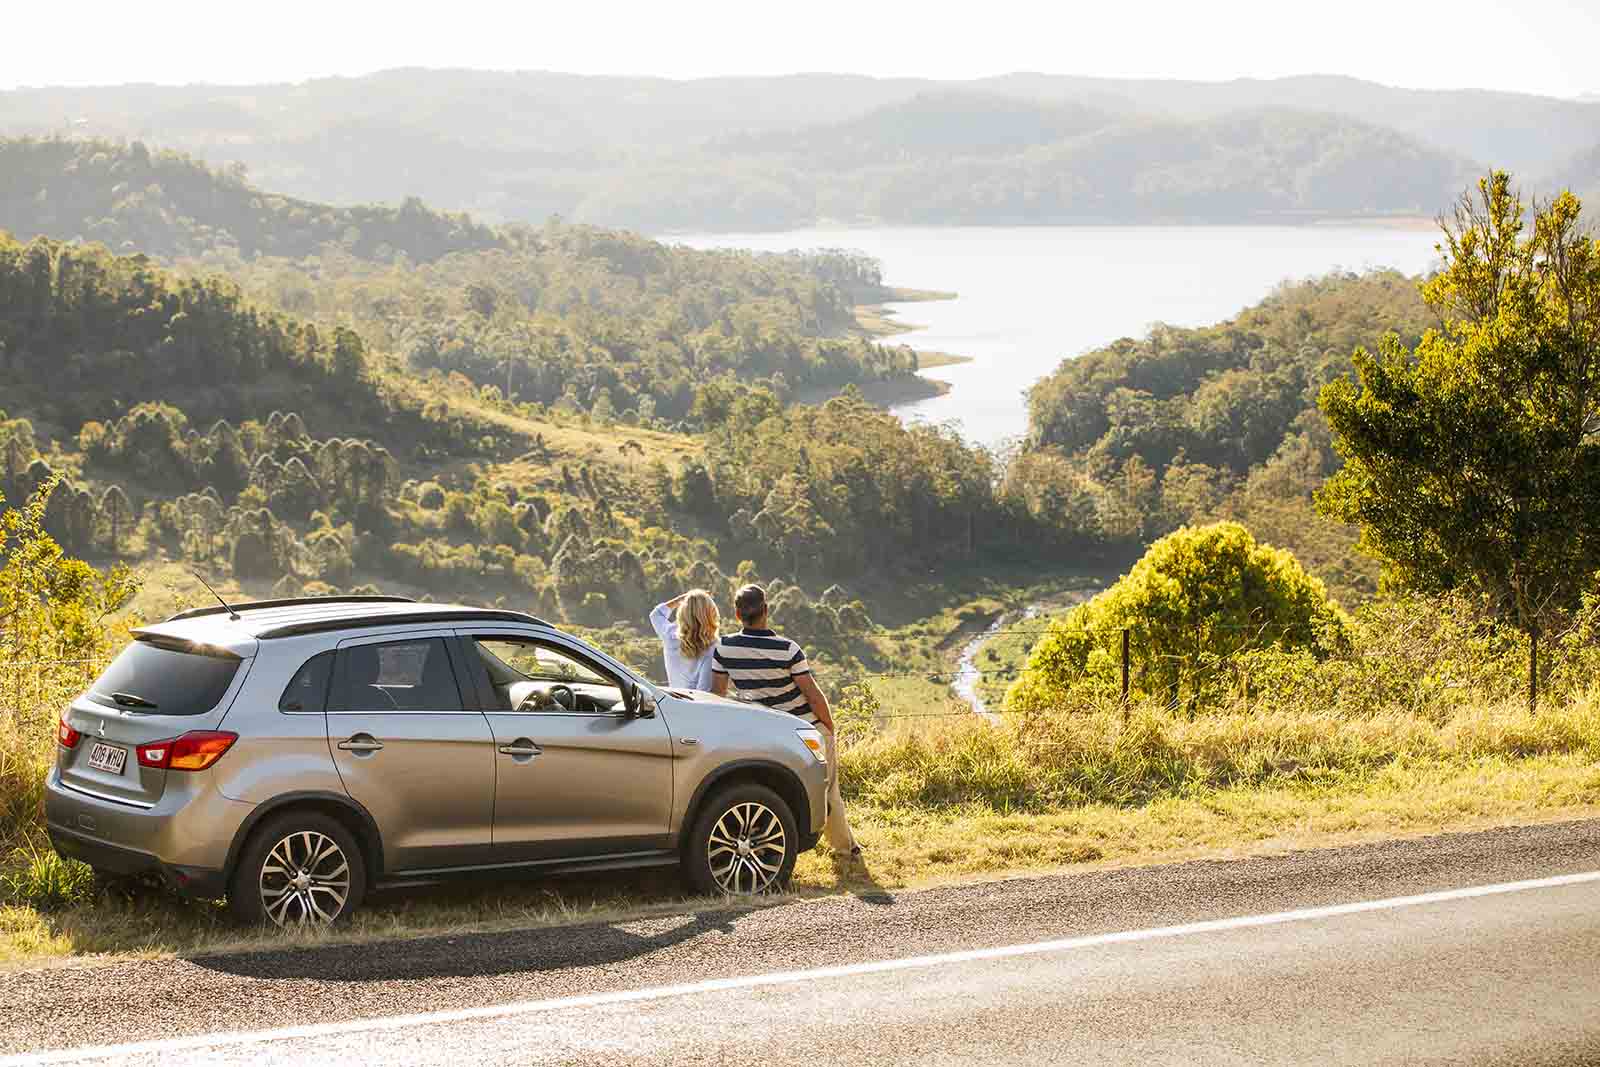 Maleny, Sunshine Coast Hinterland | Have wheels will travel: the best scenic drives from Brisbane Airport in a rental car